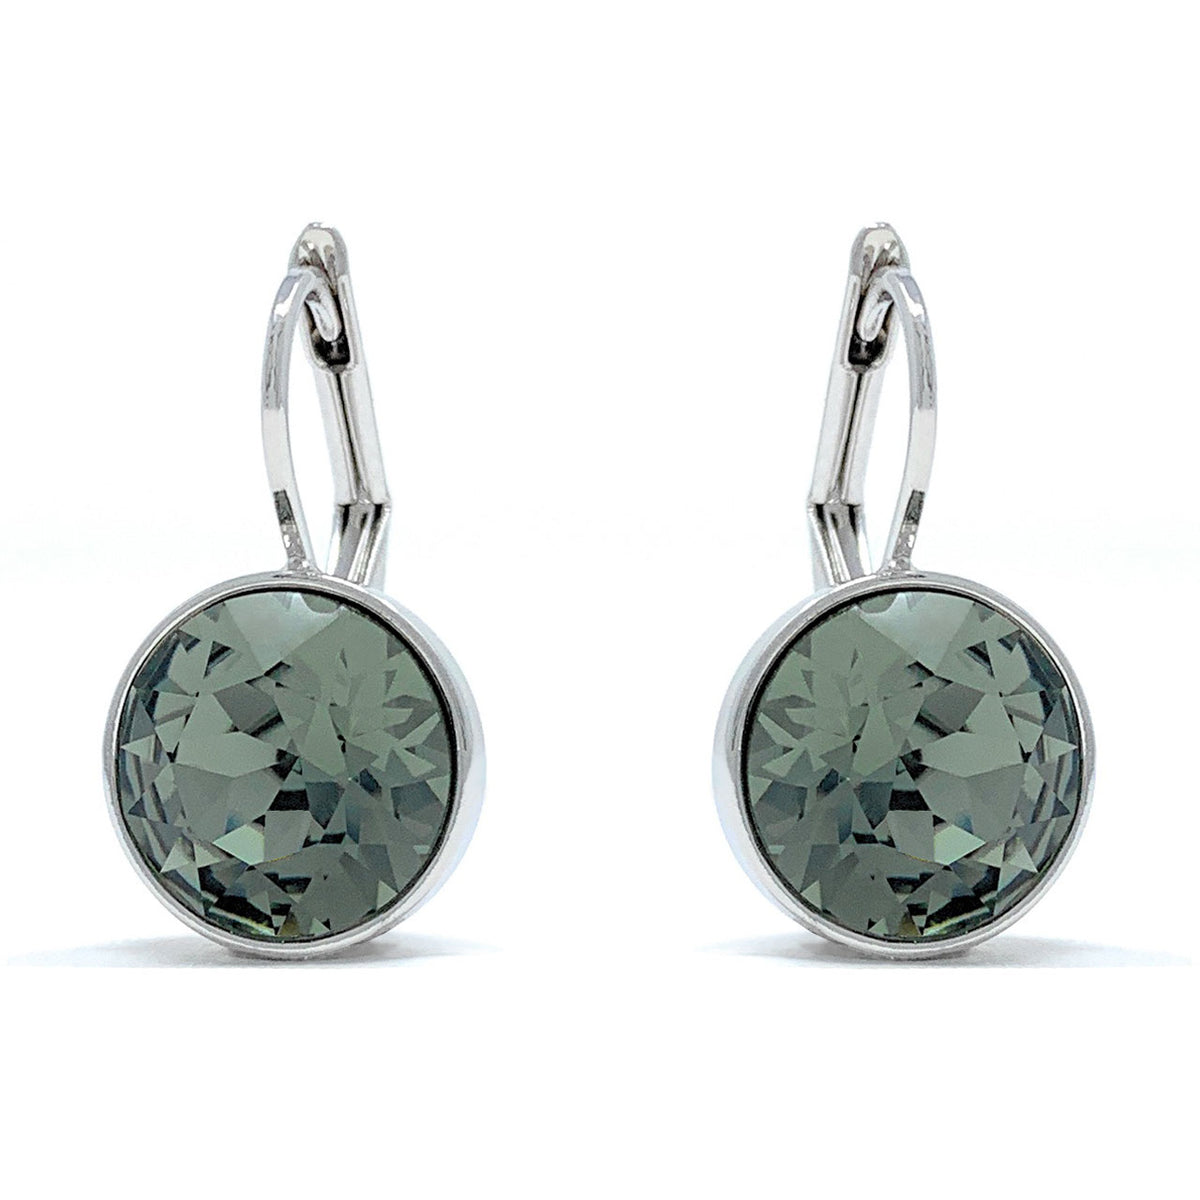 Drop Earrings with Black Diamond Crystals Rhodium Plated